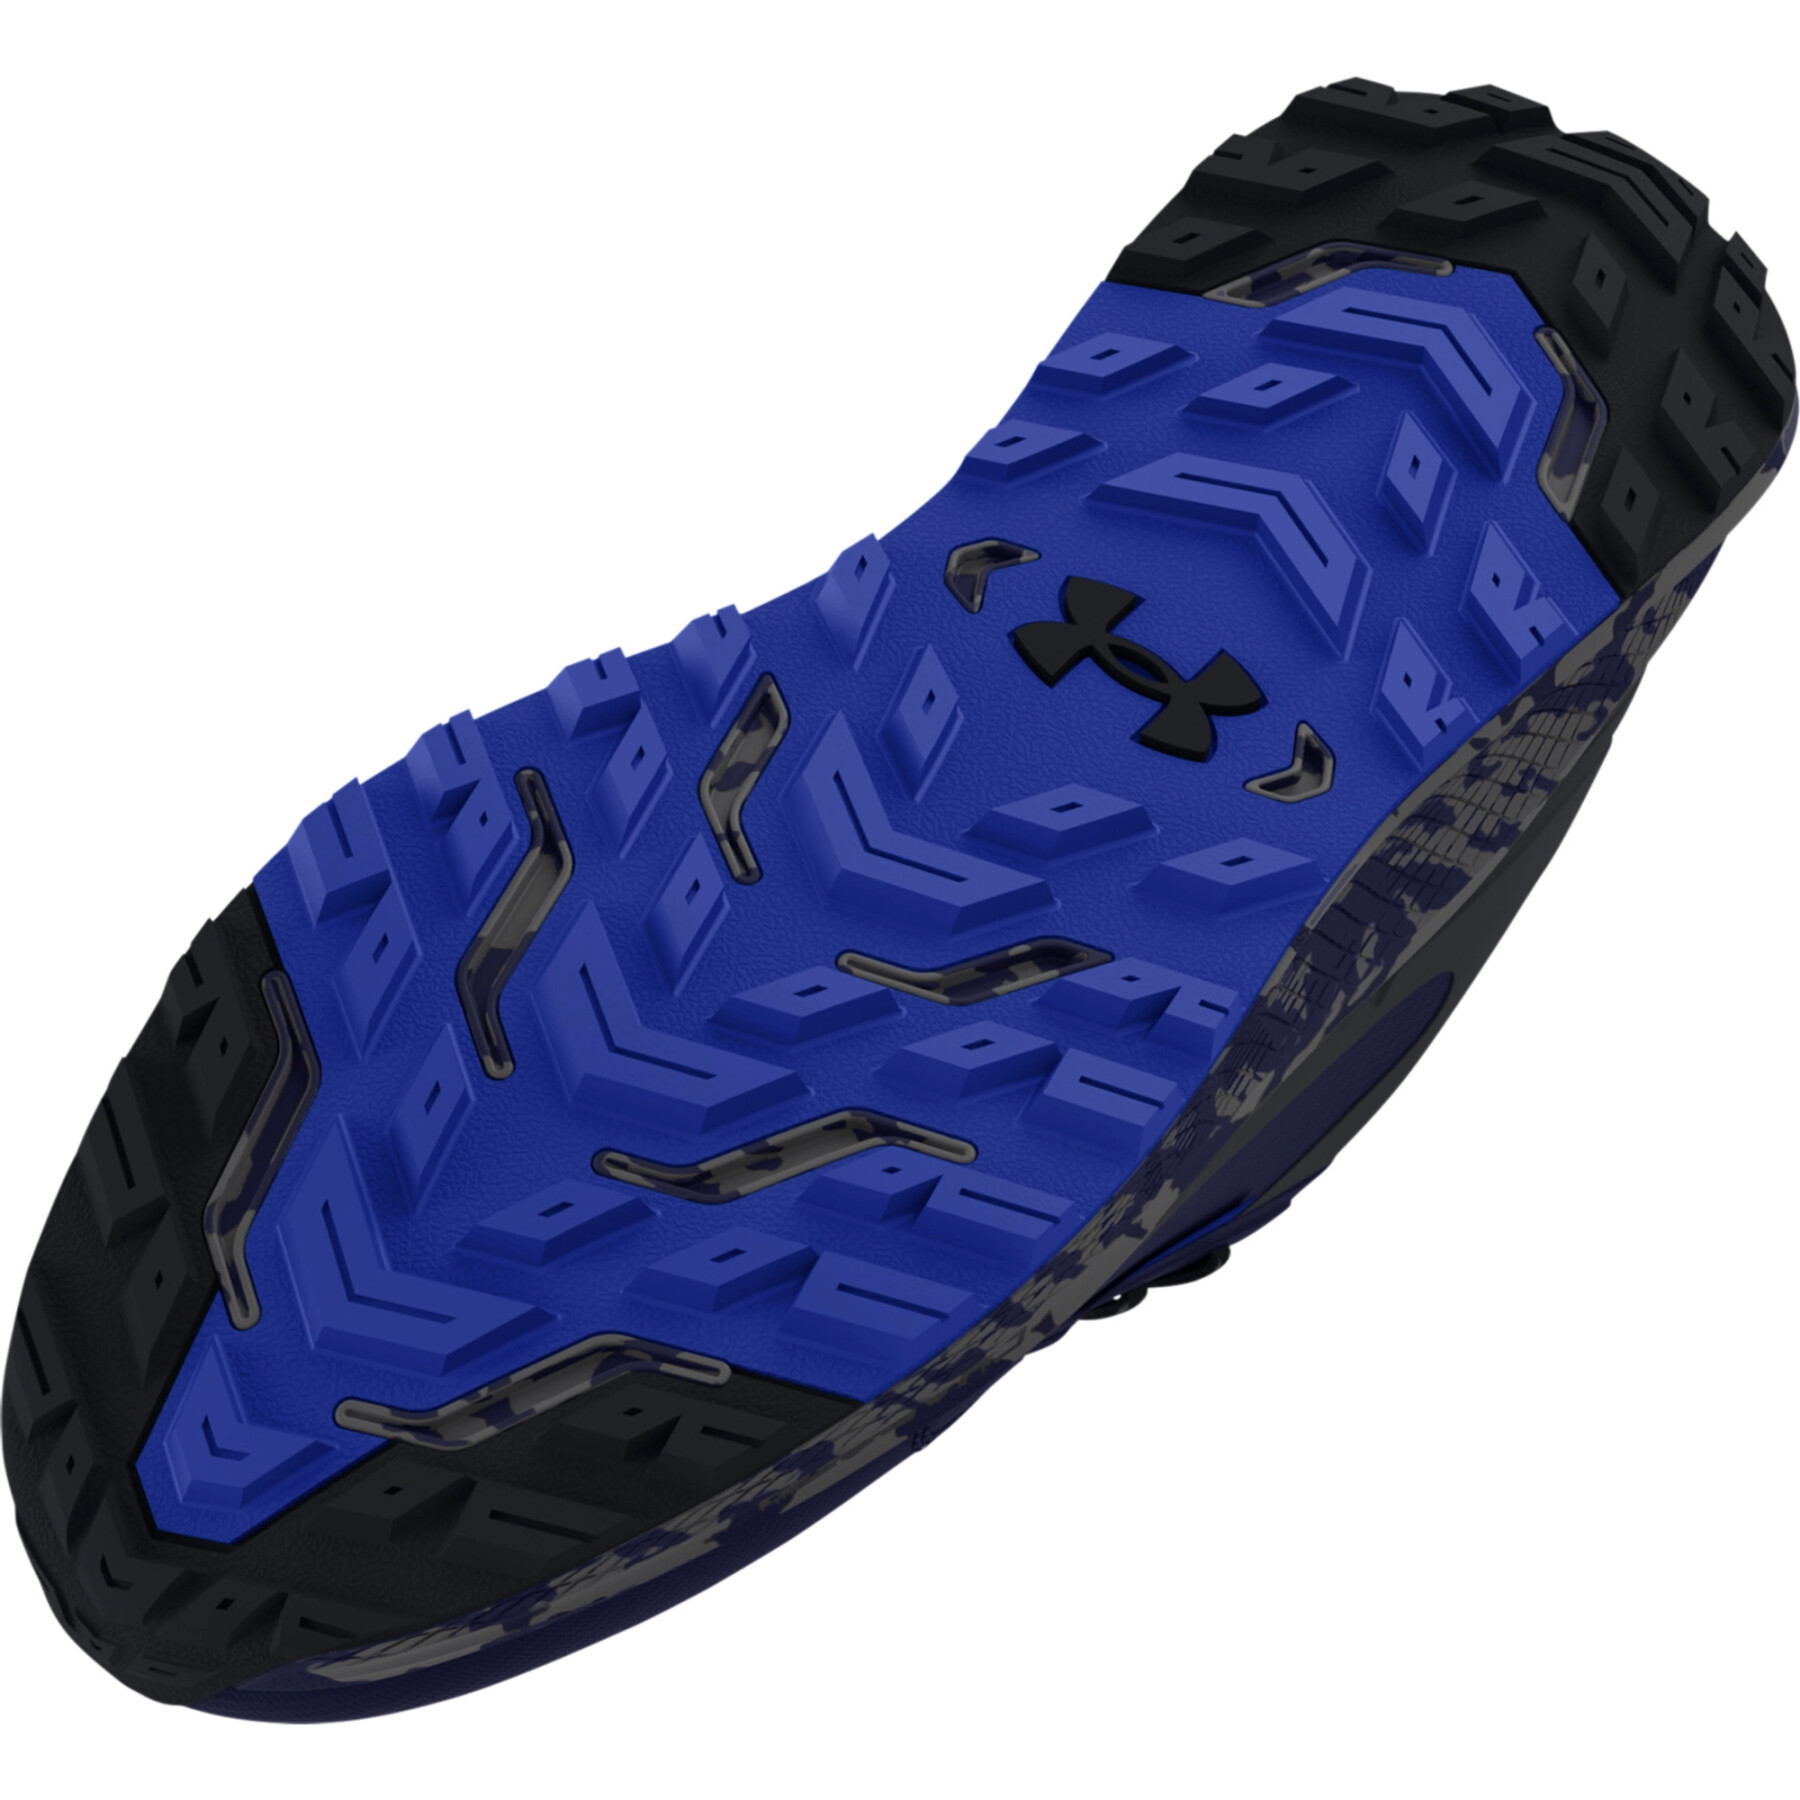 Trail-Schuhe Under Armour Charged Bandit Trail 3